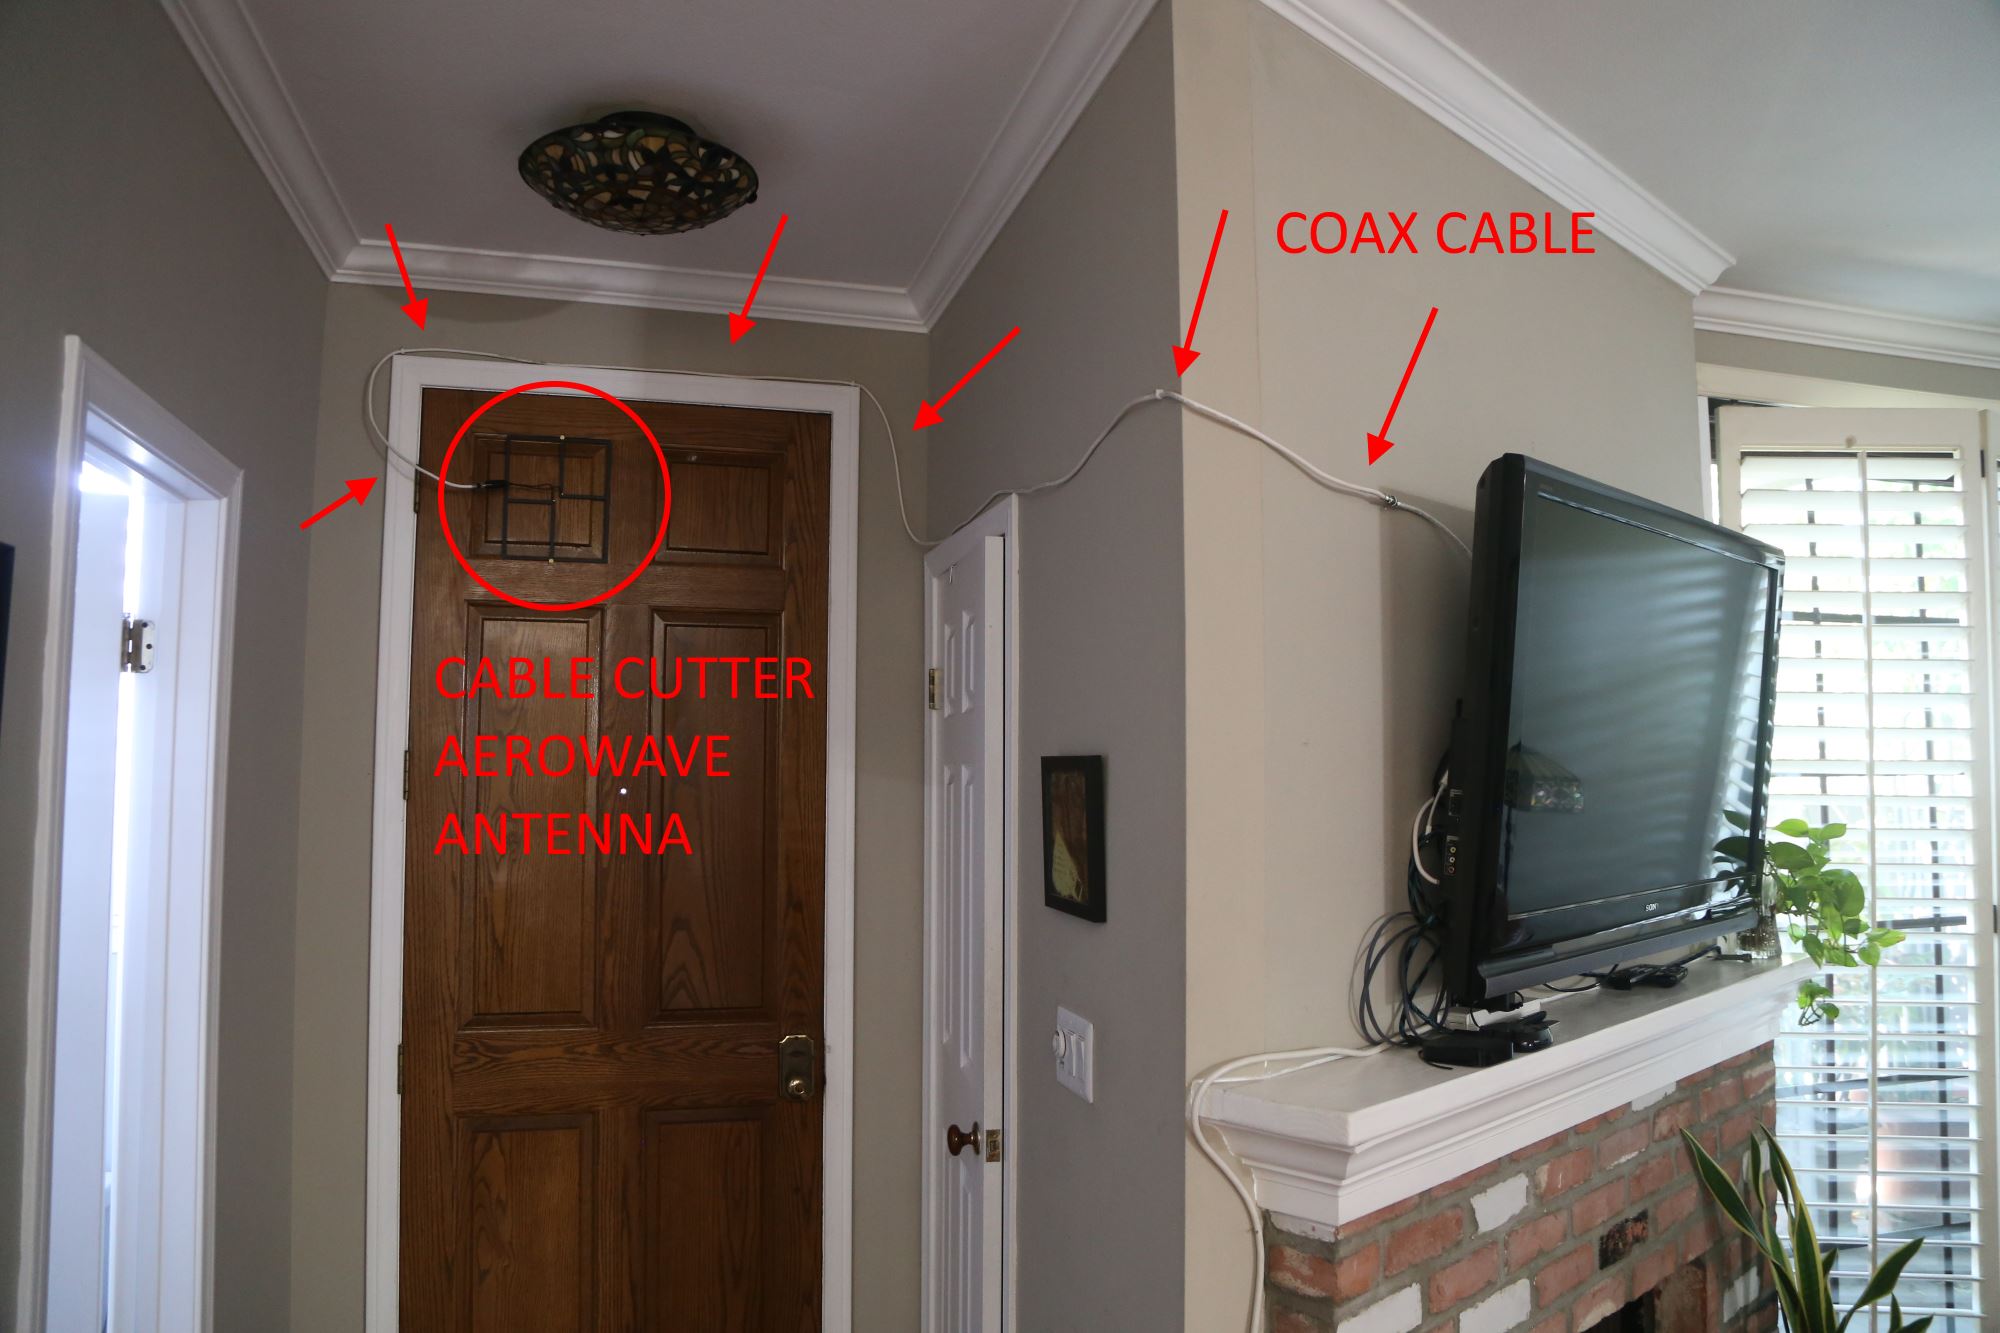 Cable Cutter Aerowave antenna